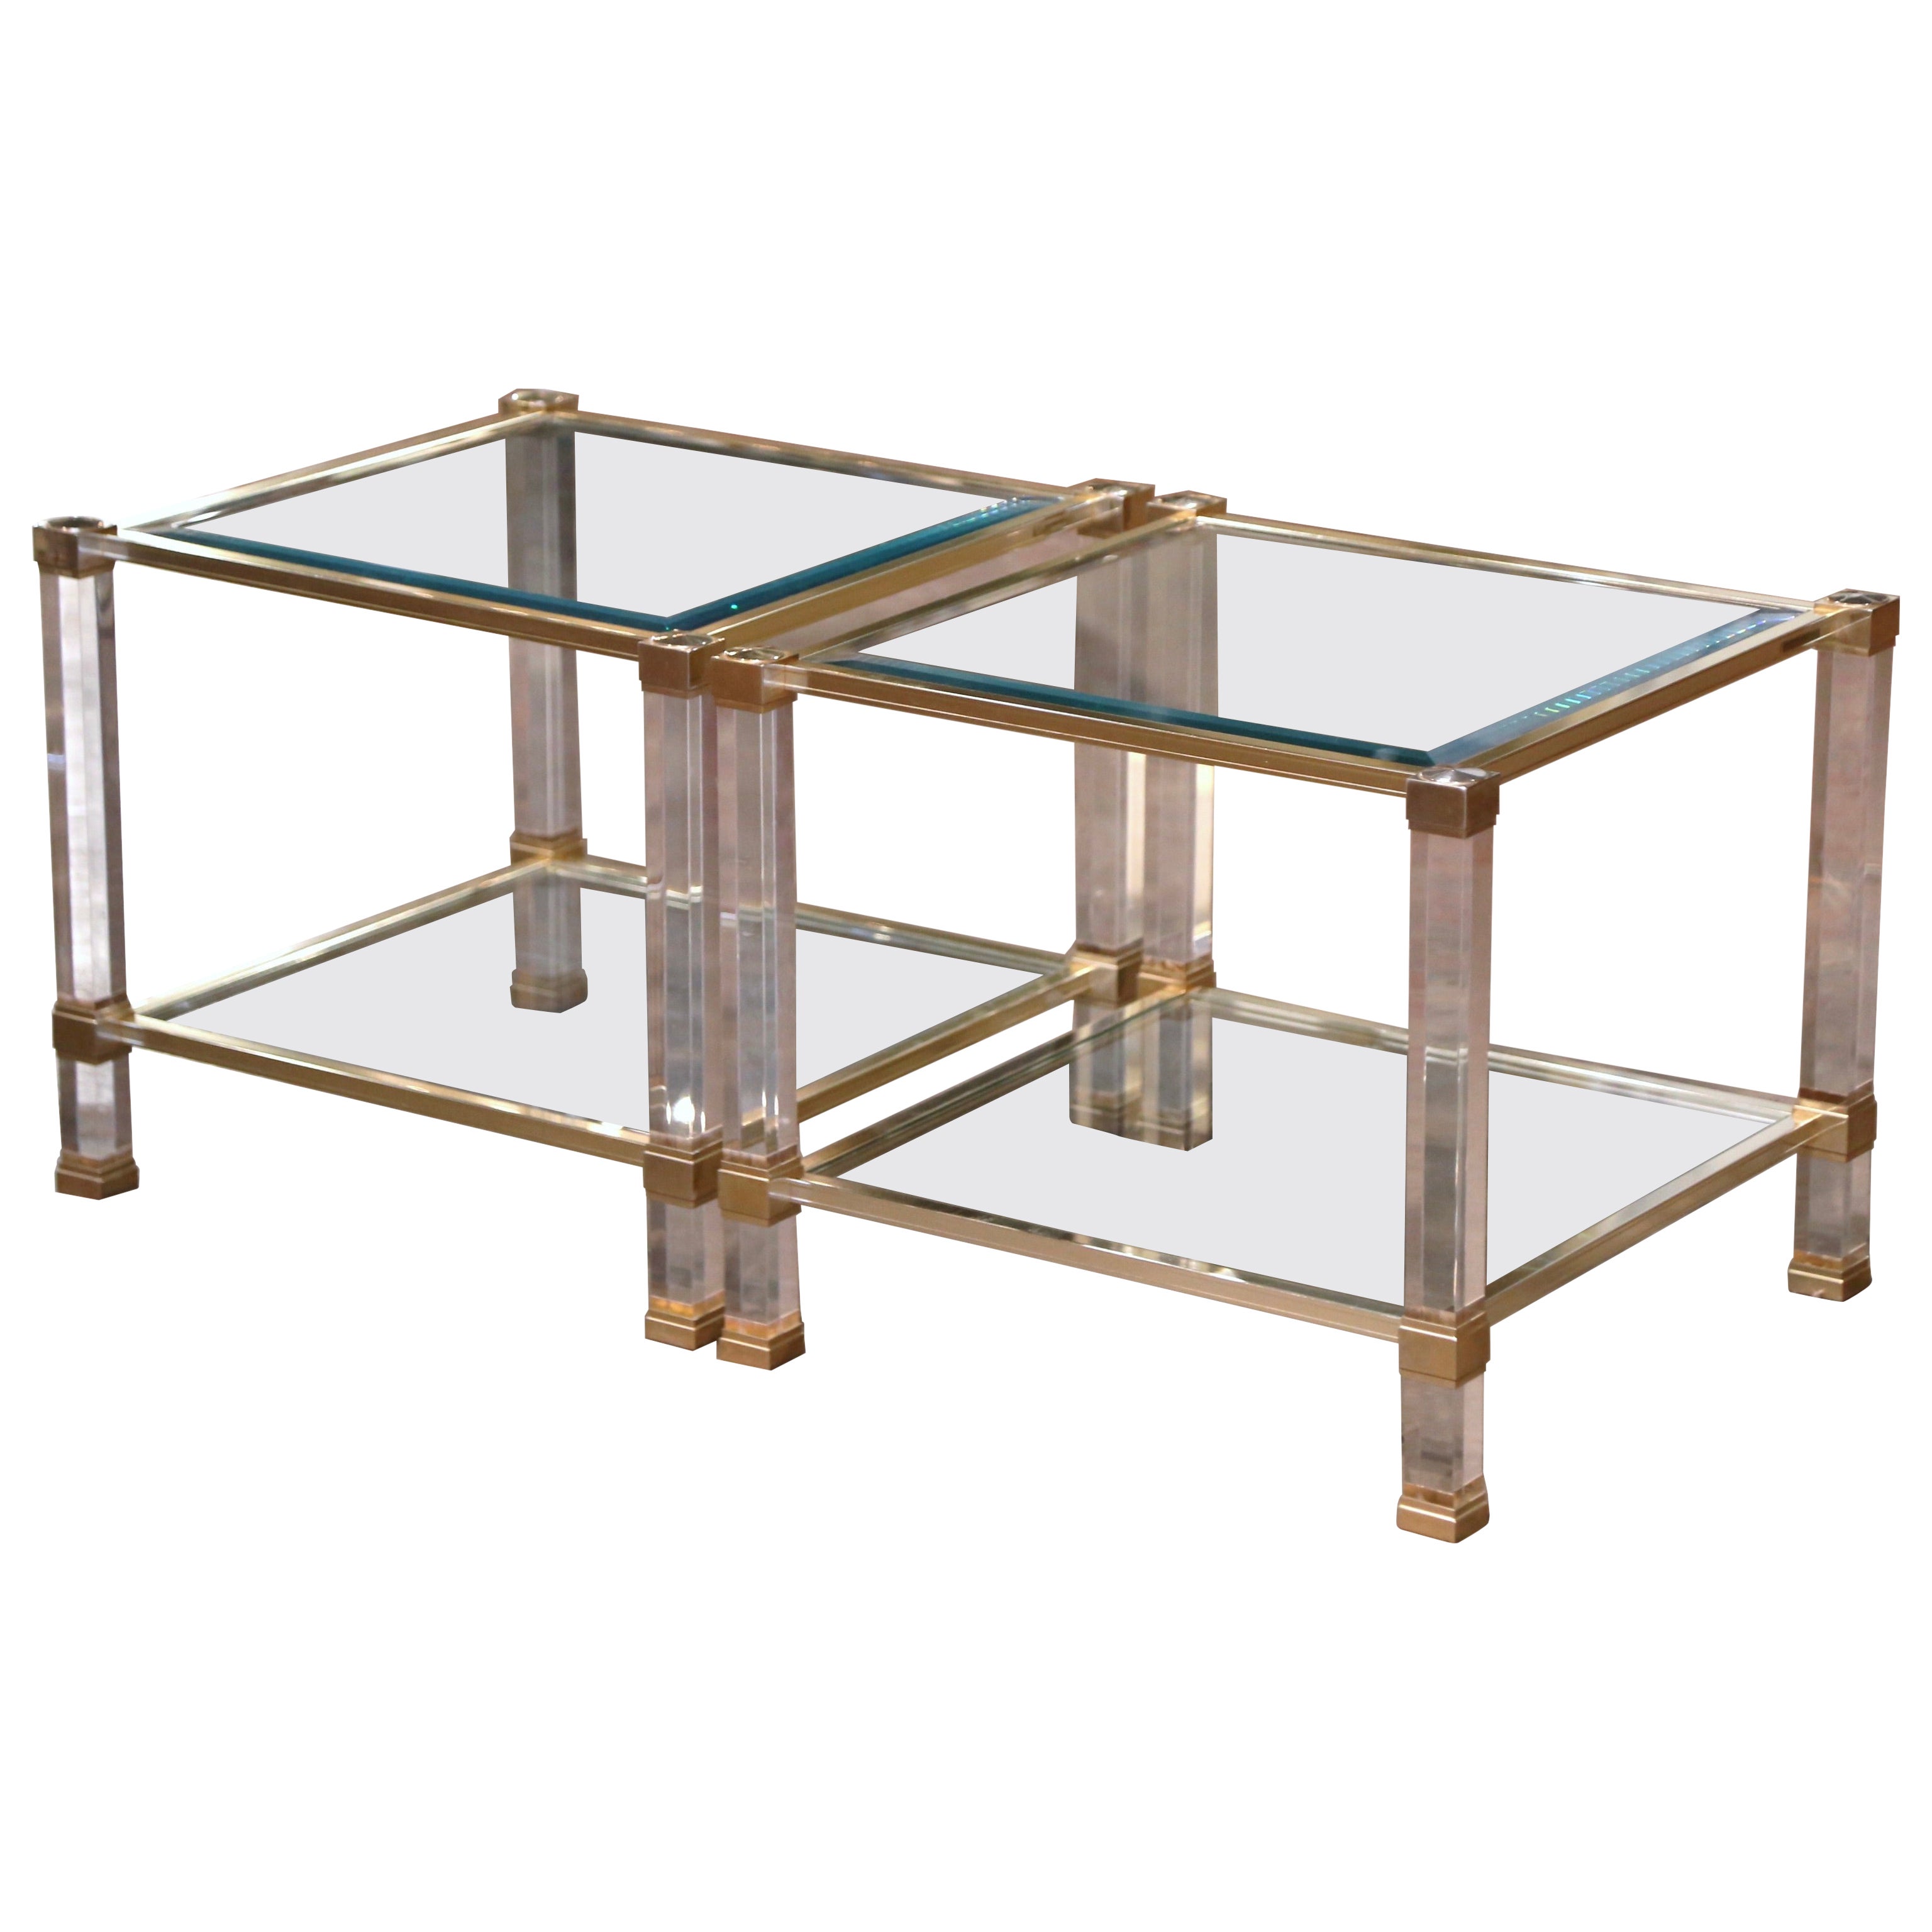 Pair of Midcentury French Lucite and Gilt Metal Side Tables by Pierre Vandel For Sale